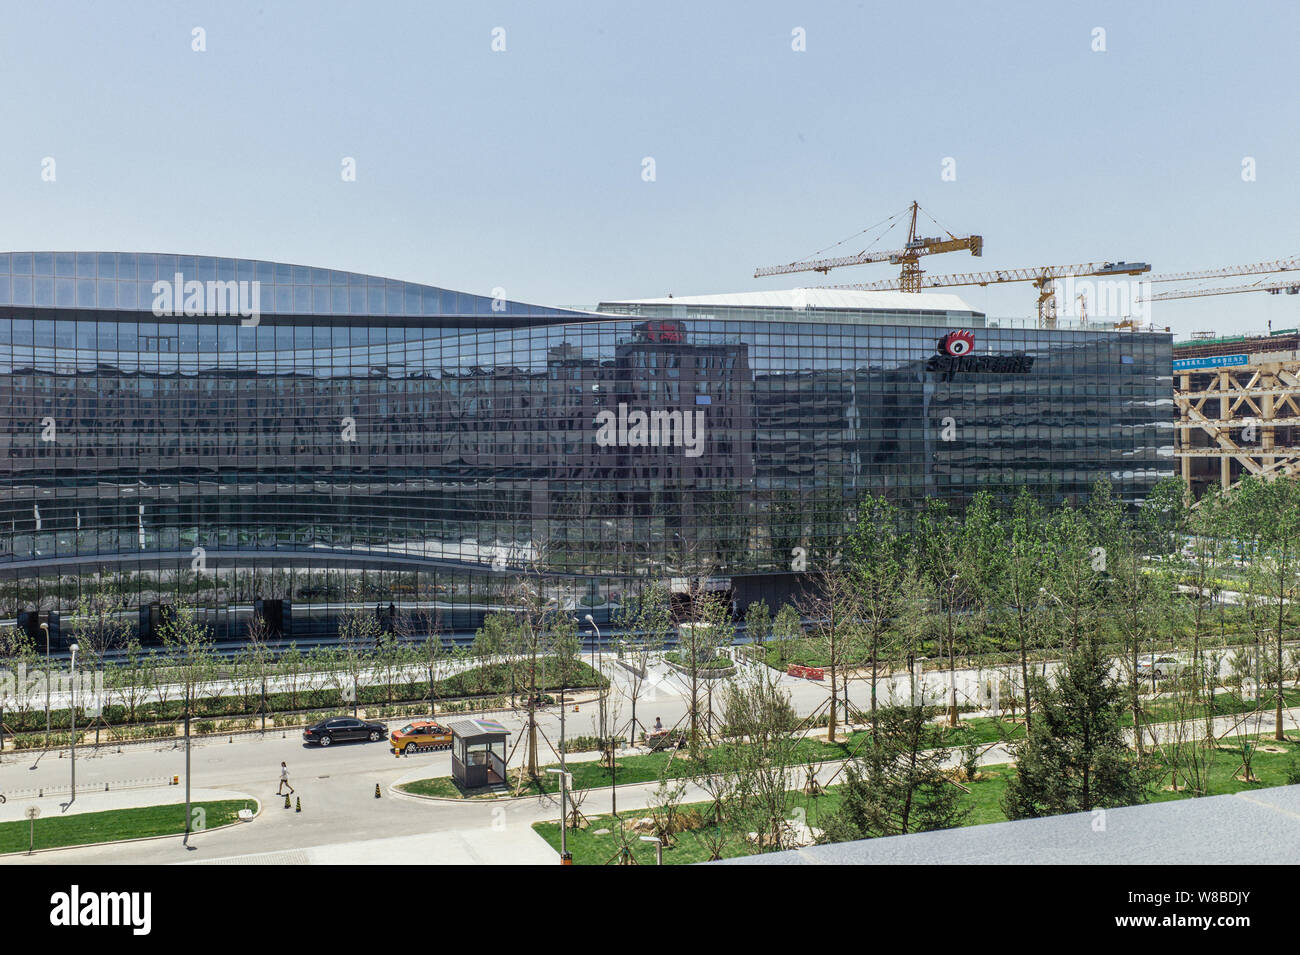 View of the Sina Plaza, the new headquarters of Sina Corporation in Beijing, China, 9 May 2016.   Aedas-designed Sina Plaza, the new headquarters of S Stock Photo